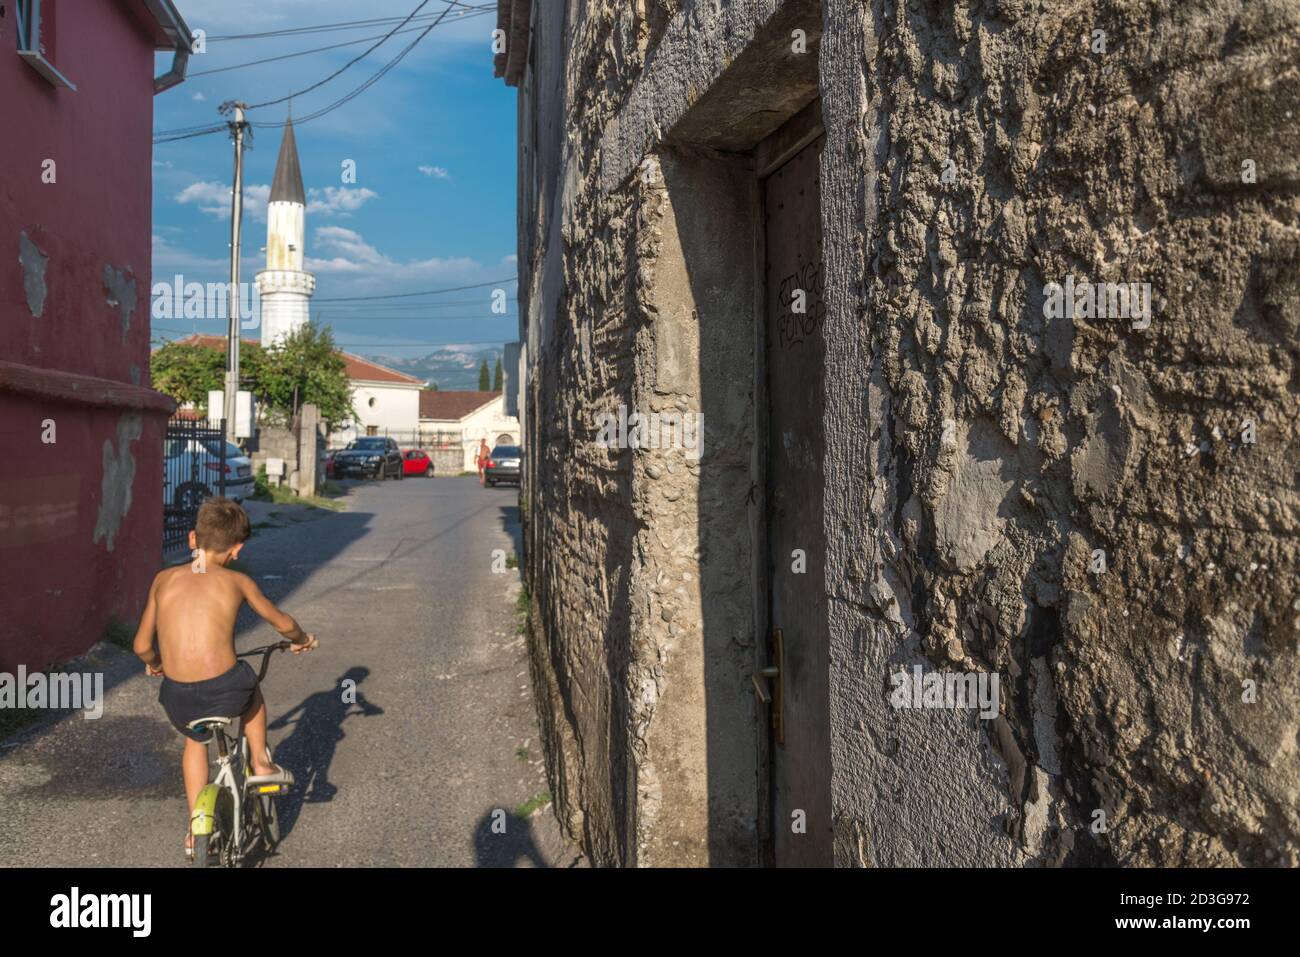 A young boy on a bicycle peddles his way through tne narrow stone streets of Stara Varas or the Old Town of Podgorica and toward one of it's Mosques. Stock Photo